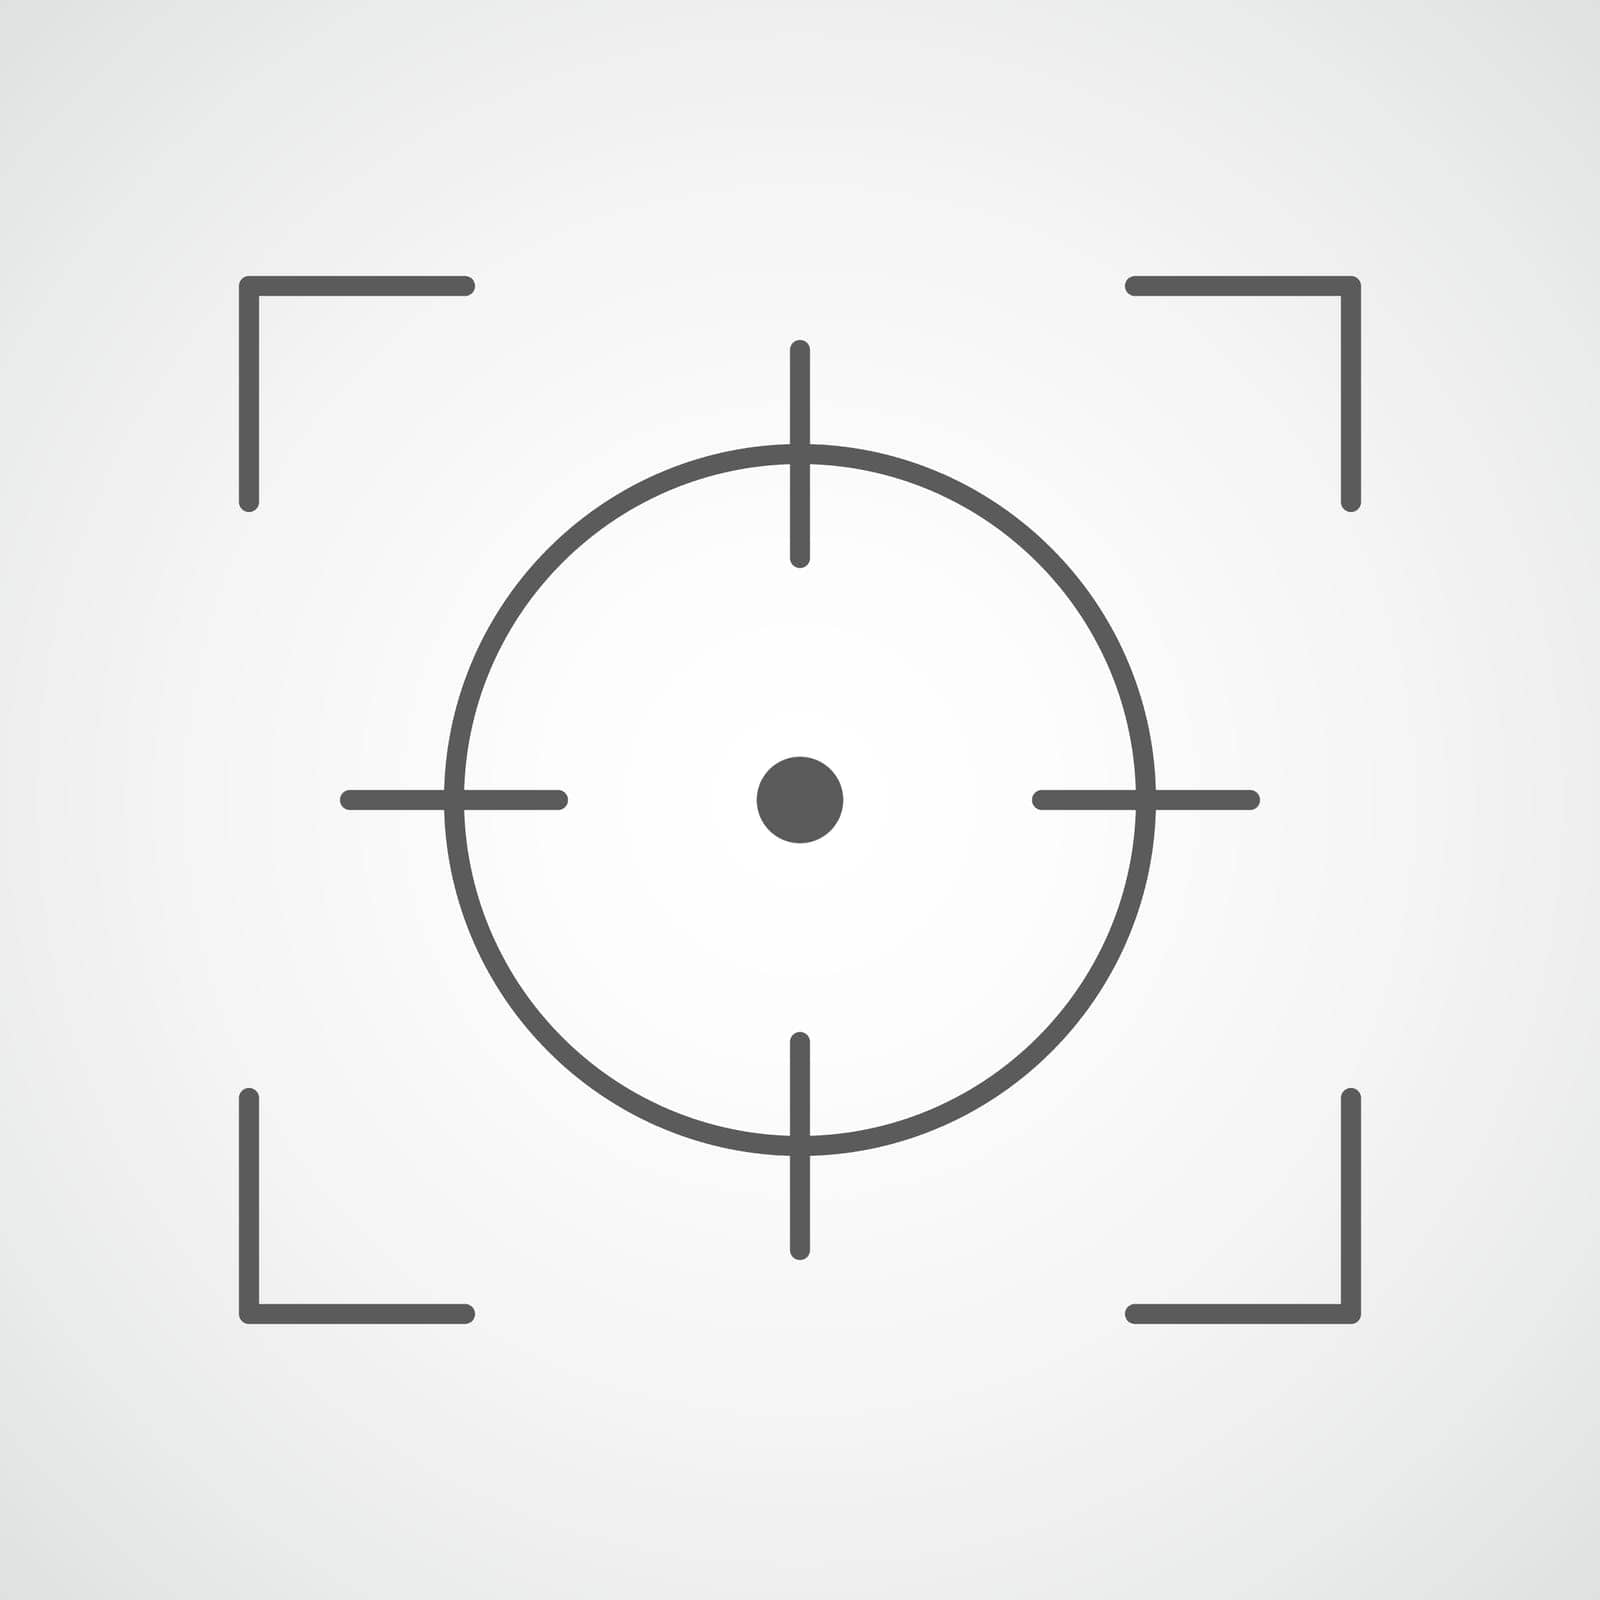 Target icon in flat style. Vector illustration. Aim icon. Crosshair icon isolated.